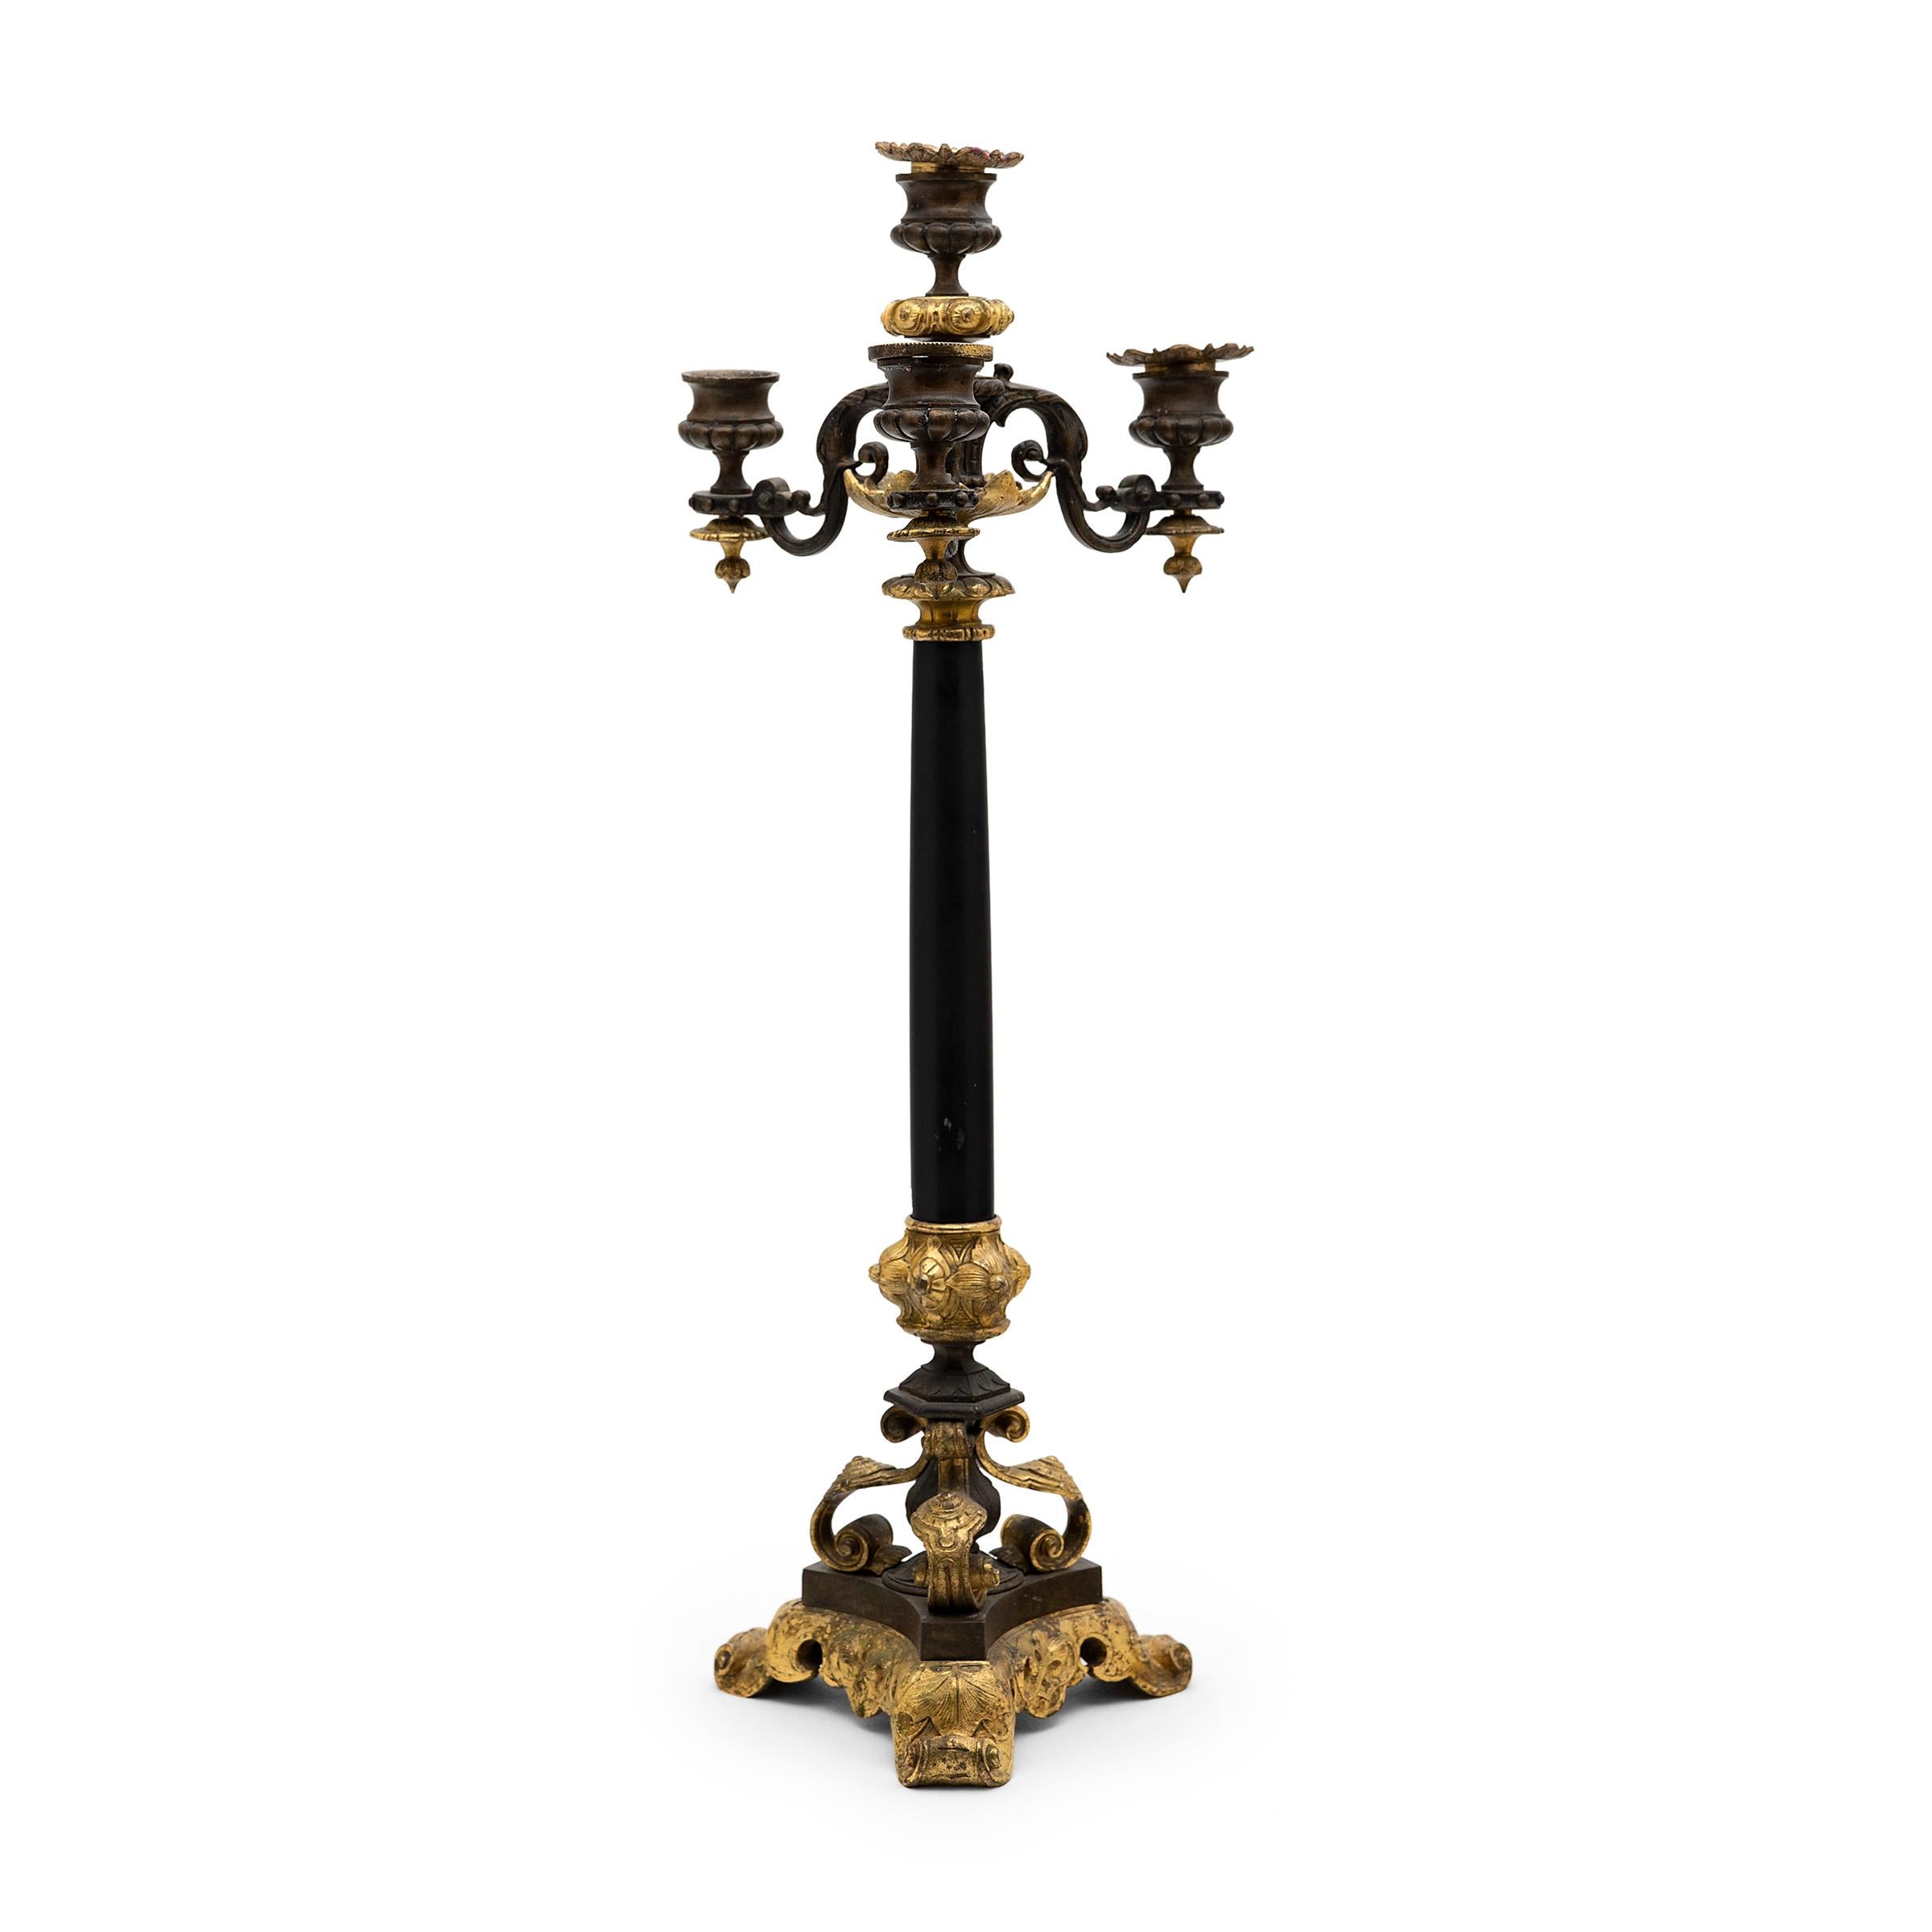 This regal pair of bronze and slate candelabras originated in 19th-century France and are beautifully detailed with molded and gilt embellishments. Crafted in the style of Empire furniture, each candlestick rests on a tiered, triform bronze base of